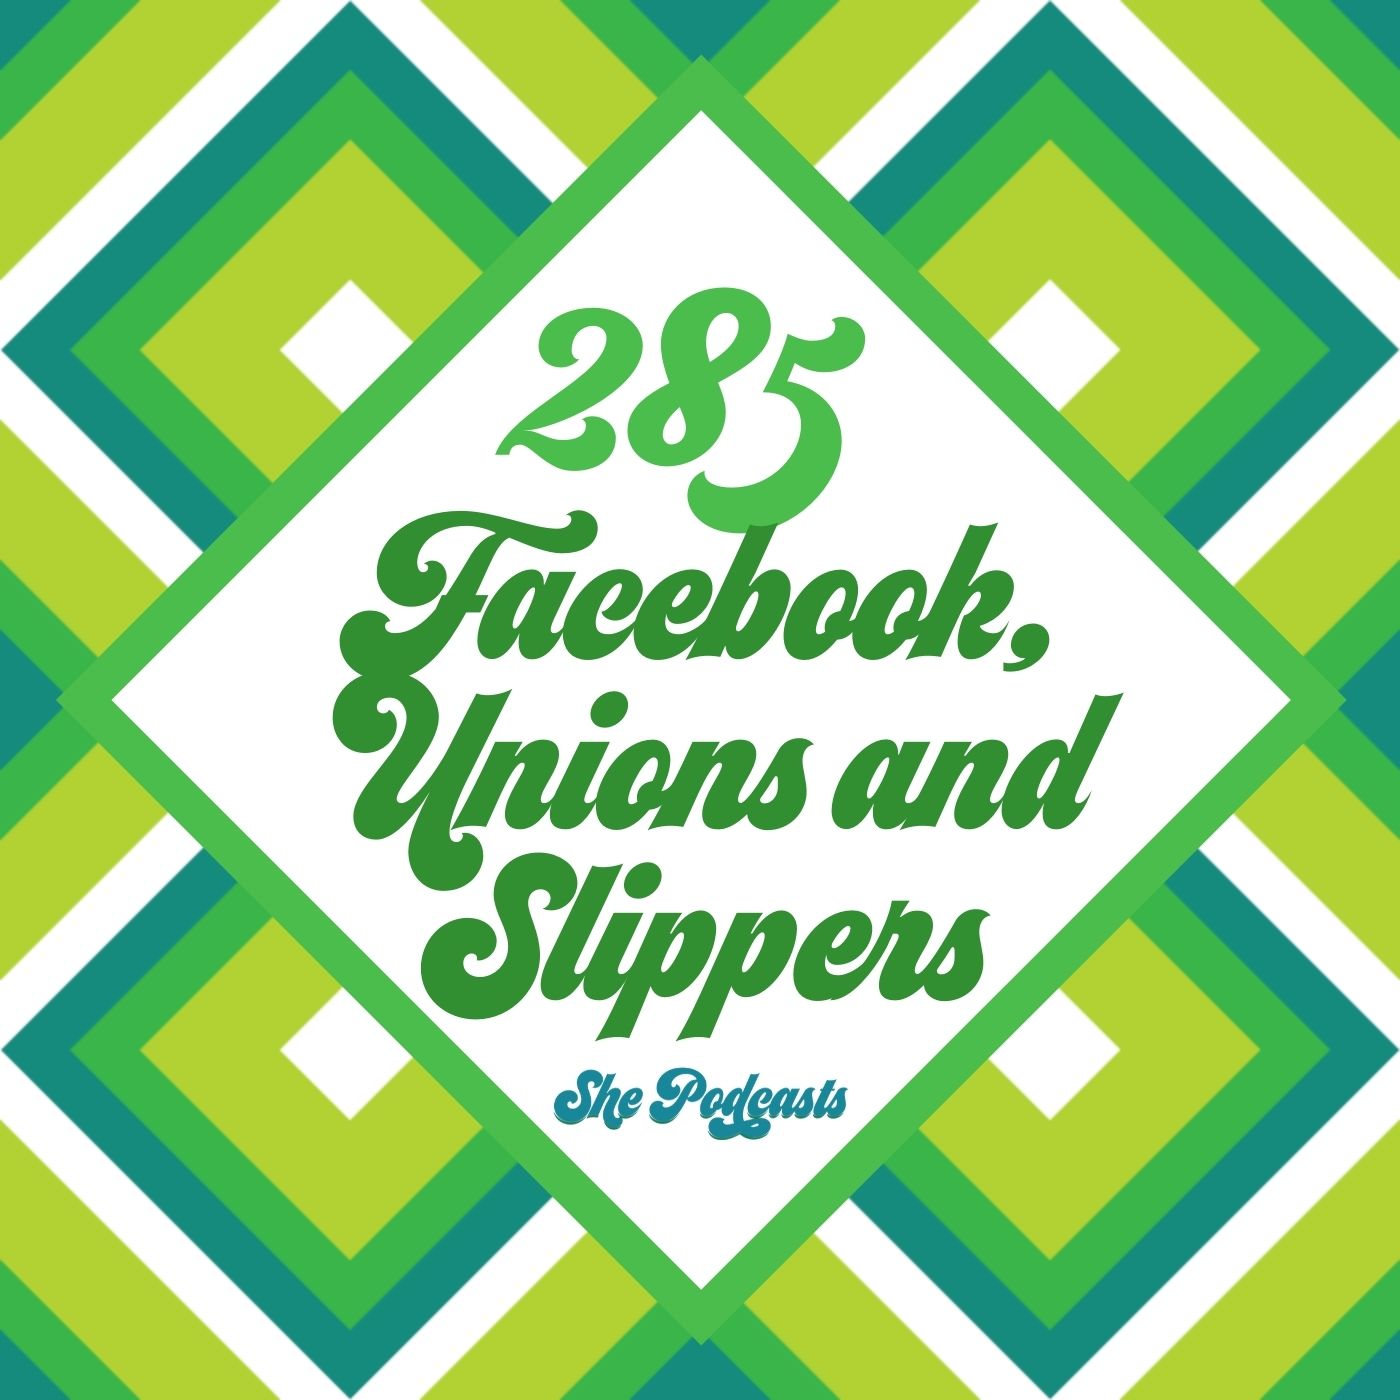 285 Facebook, Unions, Slippers